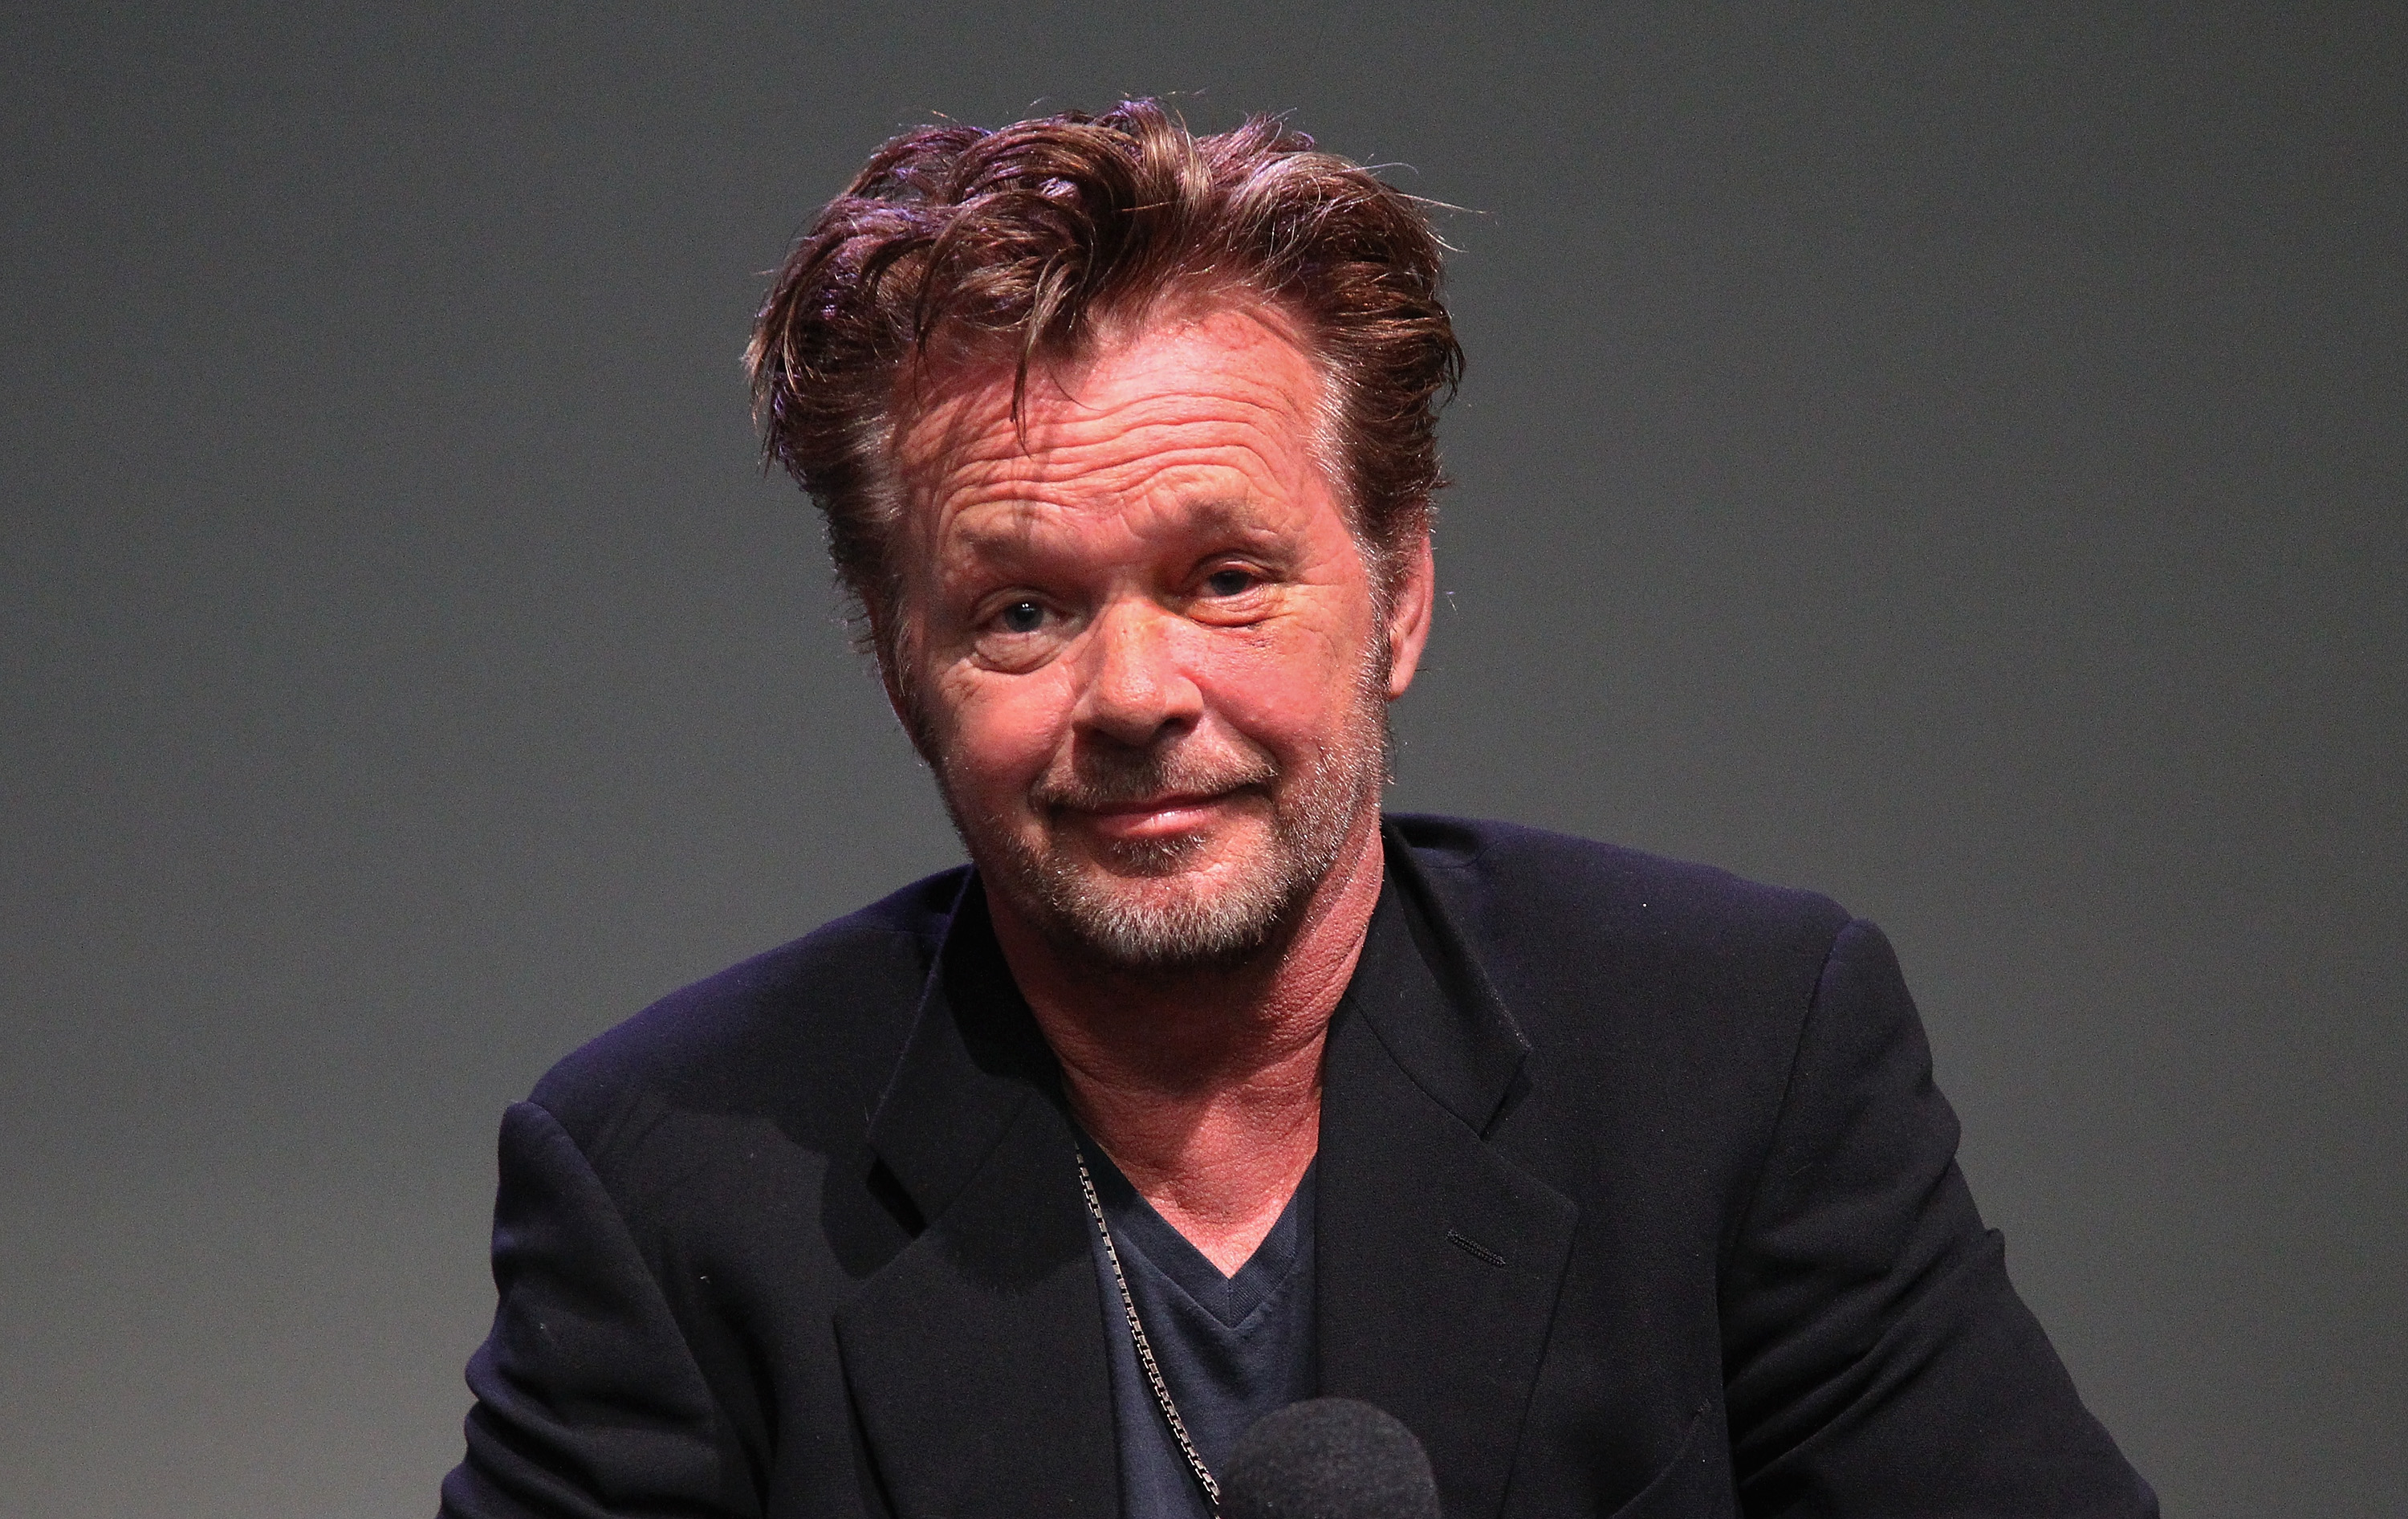 John Mellencamp at Meet the Creators at Apple Store Soho on June 3, 2013, in New York City | Source: Getty Images